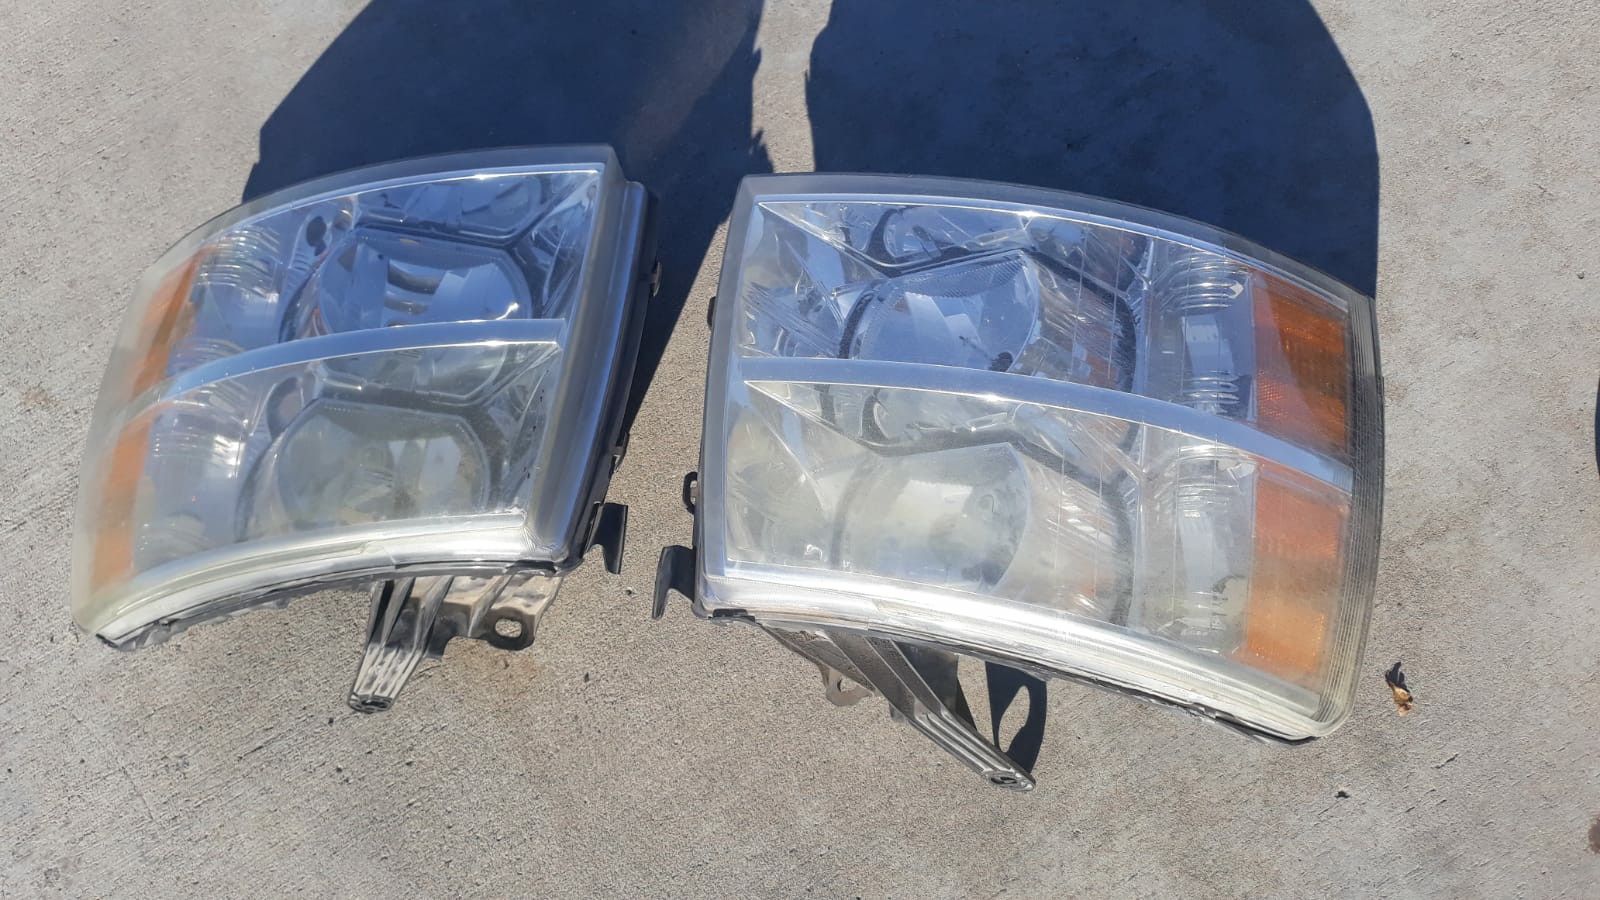 Headlights for a Chevy silverado pick up truck 2007